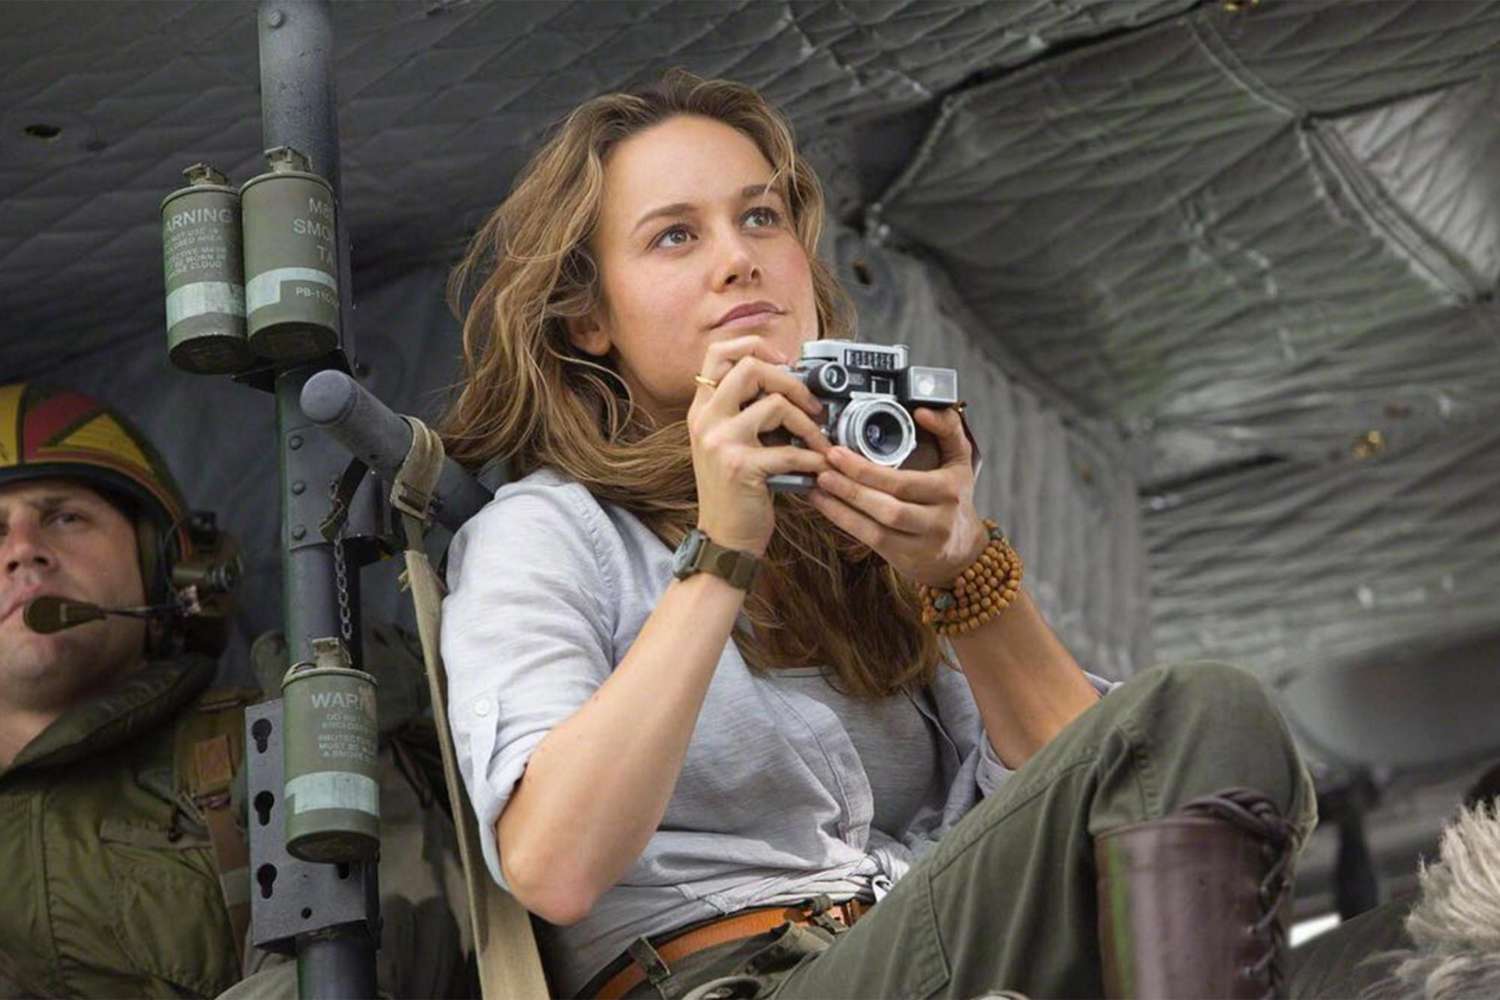 Brie Larson says 'Kong: Skull Island' character is a tribute to journalists | EW.com